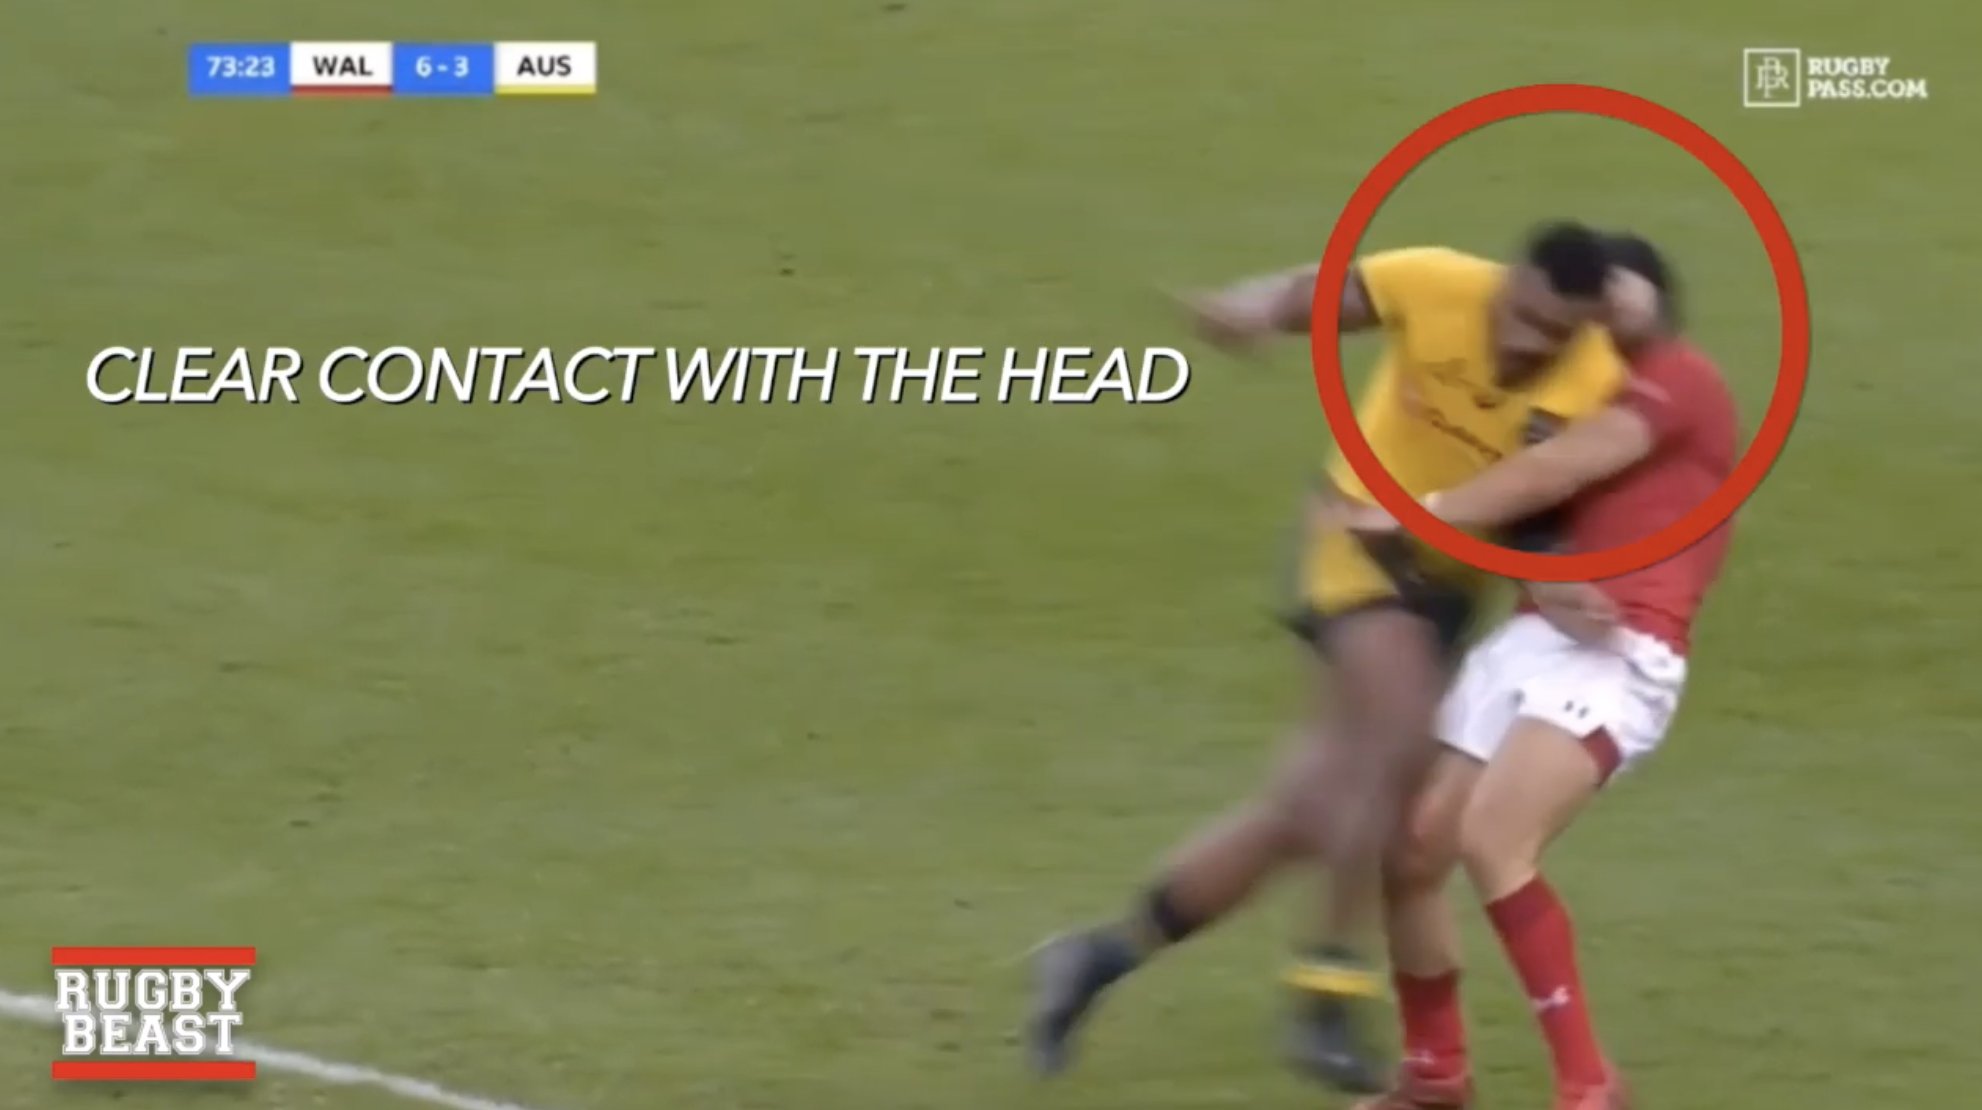 VIDEO: Someone has made a DAMNING video on the refereeing during the Autumn Internationals and it's SPOT ON